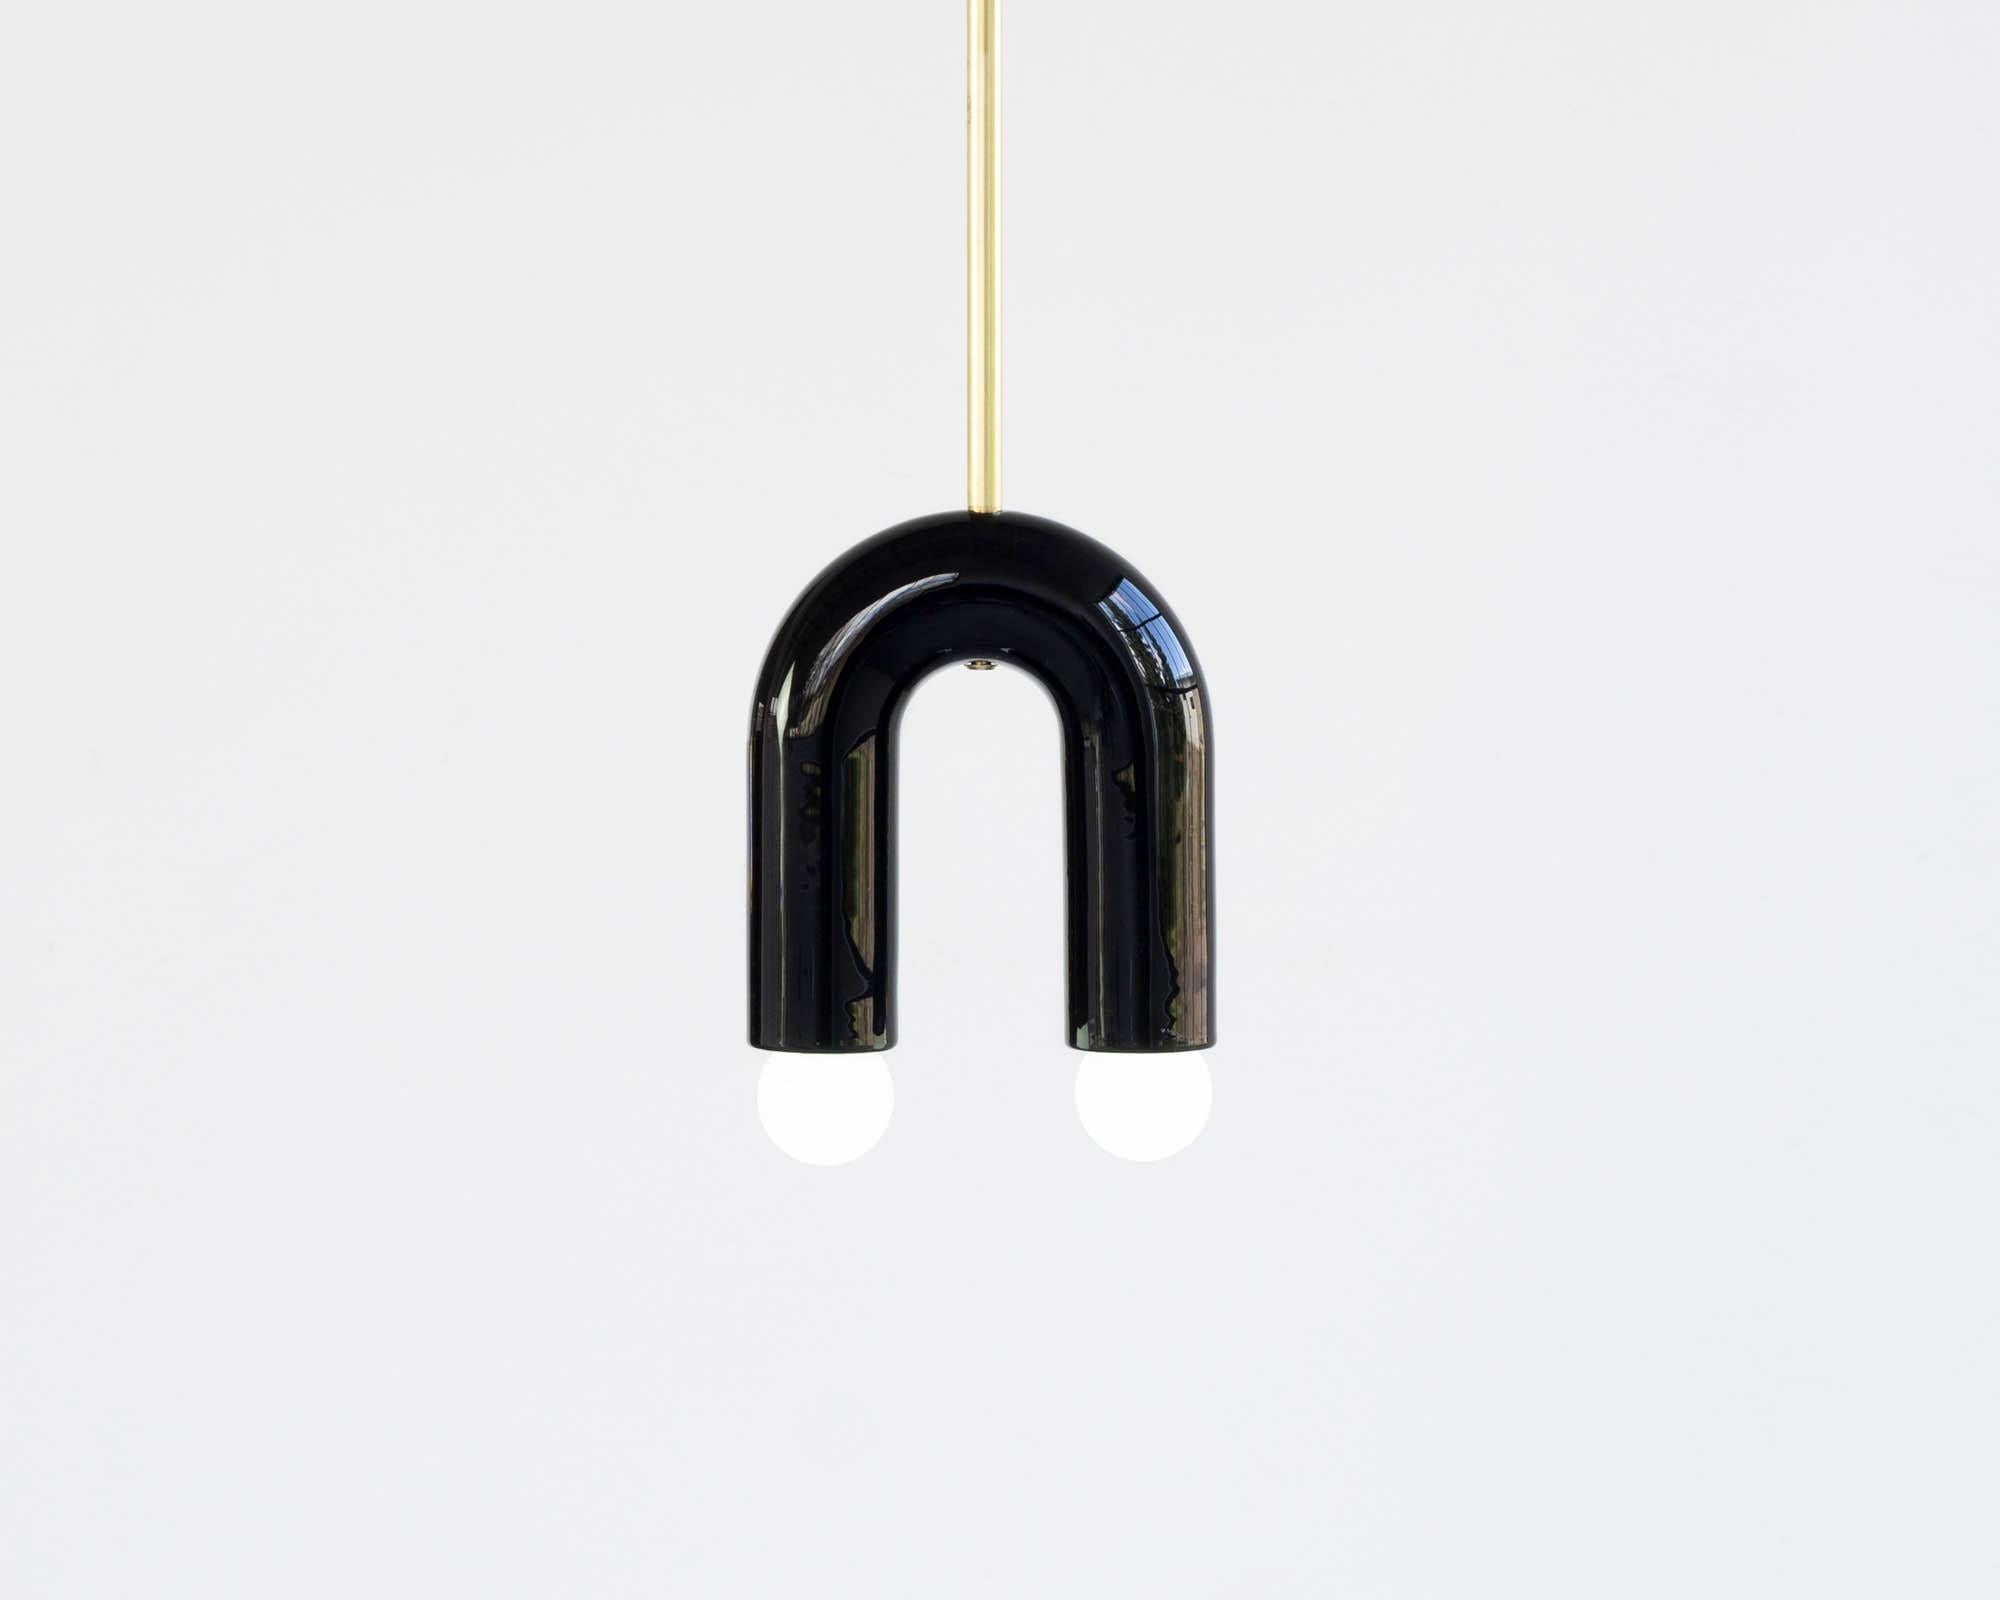 Pendant lamp / ceiling lamp / chandelier
Designer: Pani Jurek
Model: TRN A1
Model shown: TRN A1, Black, Chrome rod
Dimensions: H 17.5 x 15 x 5 cm

Bulb (not included): E27/E26, compatible with US electric system

Materials: Hand glazed ceramic and